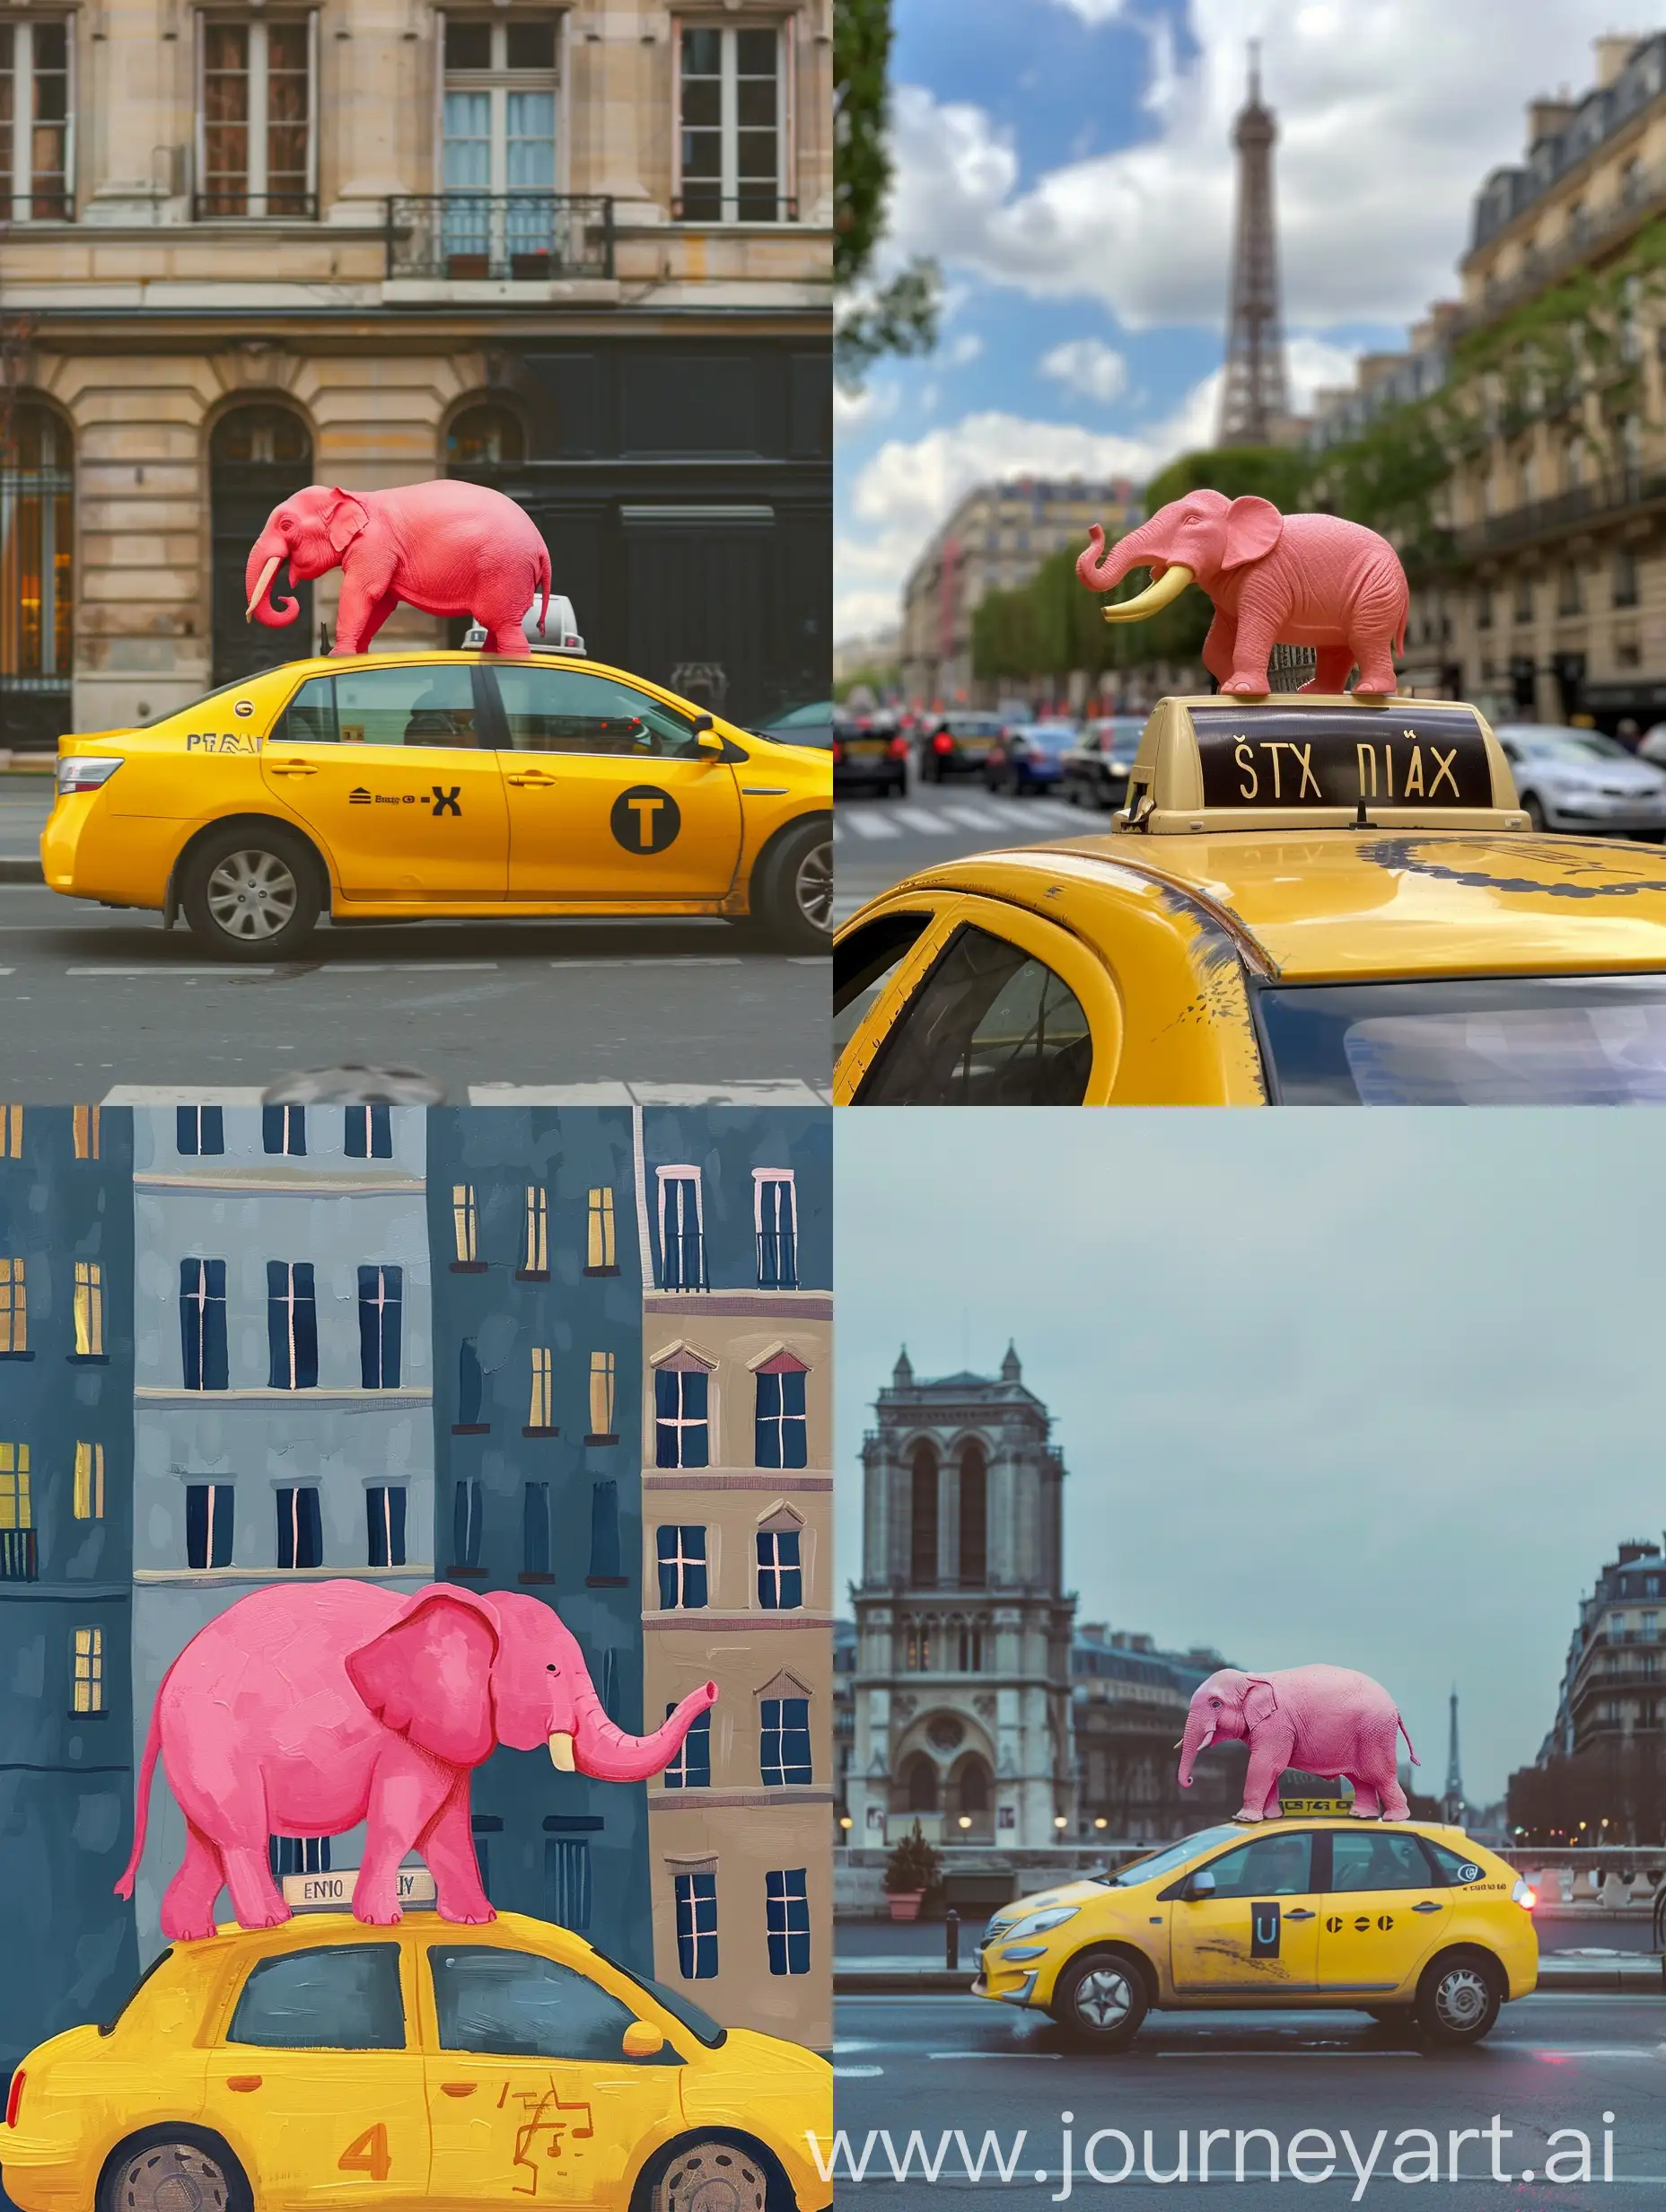 Pink-Elephant-Sightseeing-in-Paris-on-Yellow-Taxi